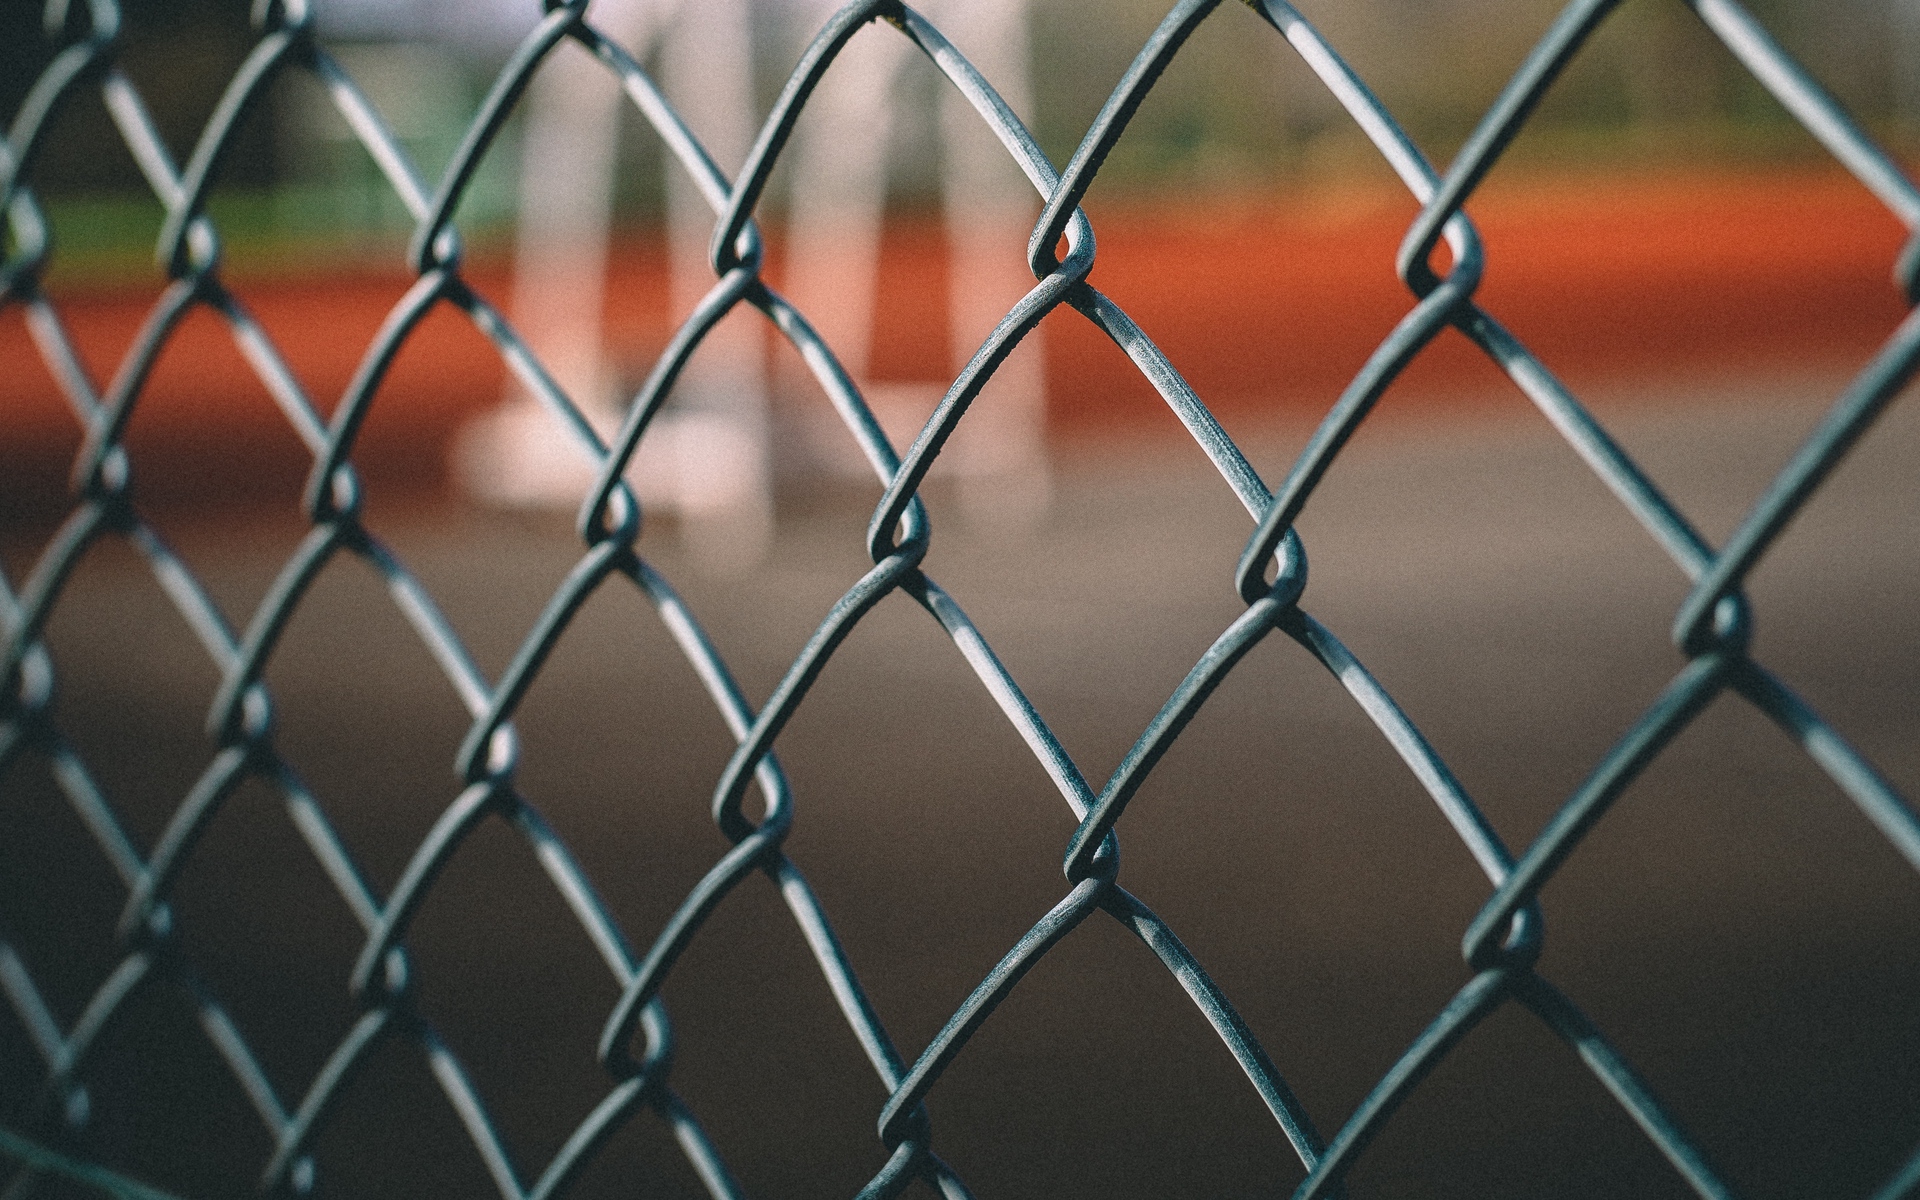 Wallpaper Grid, Fence, Blur - Background Images Hd Download - 1920x1200  Wallpaper 